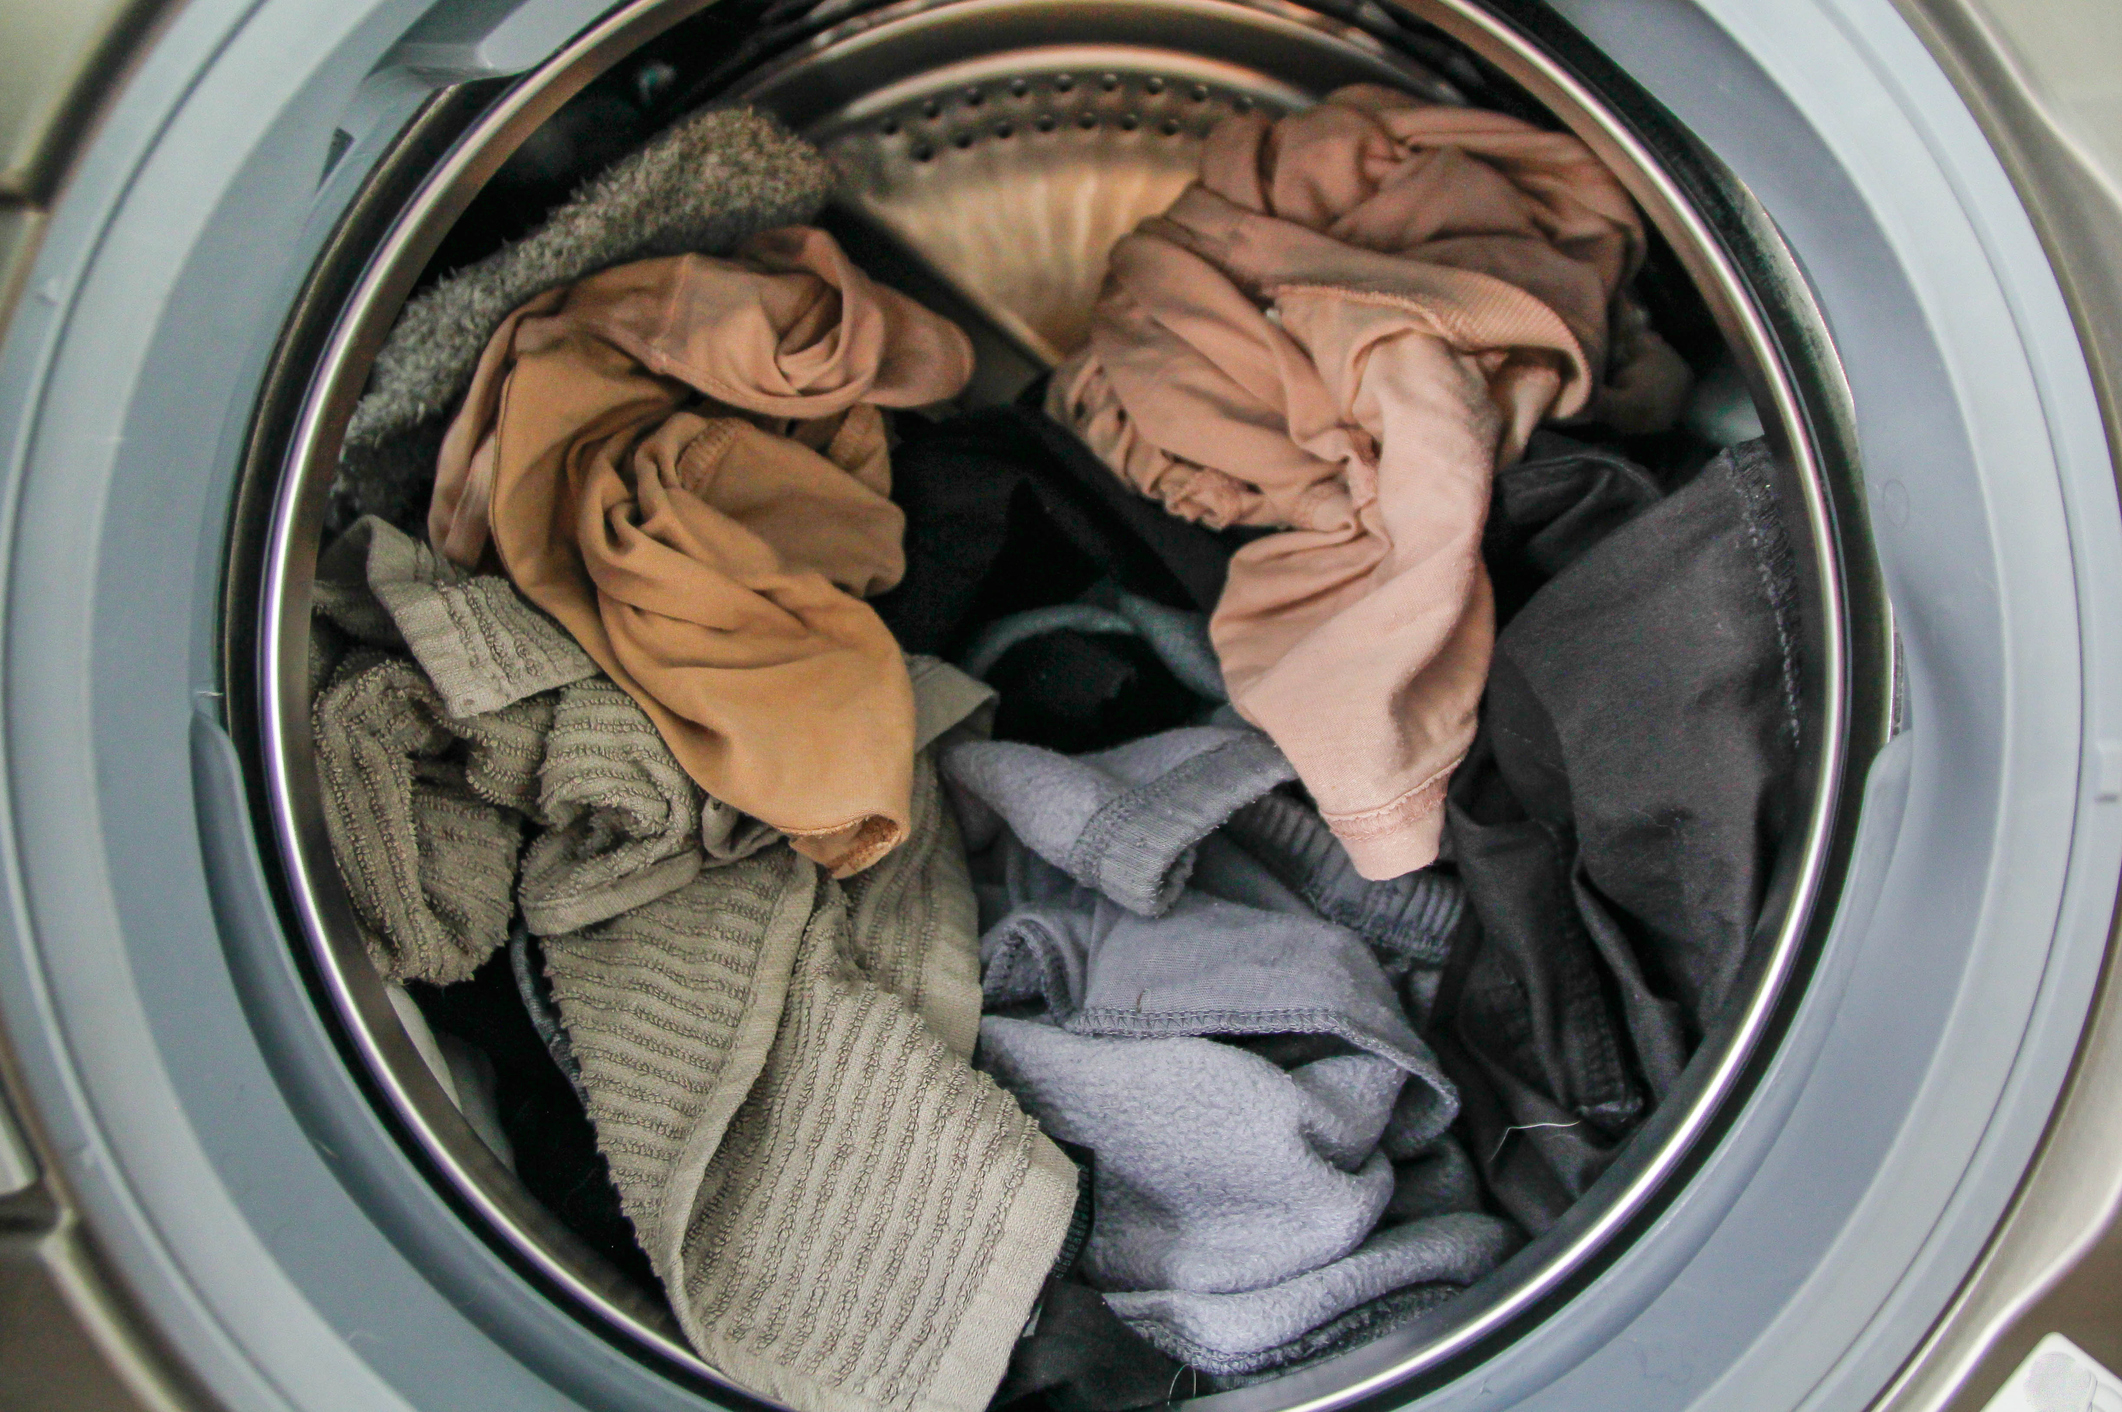 Open washing machine with a mix of laundry items inside